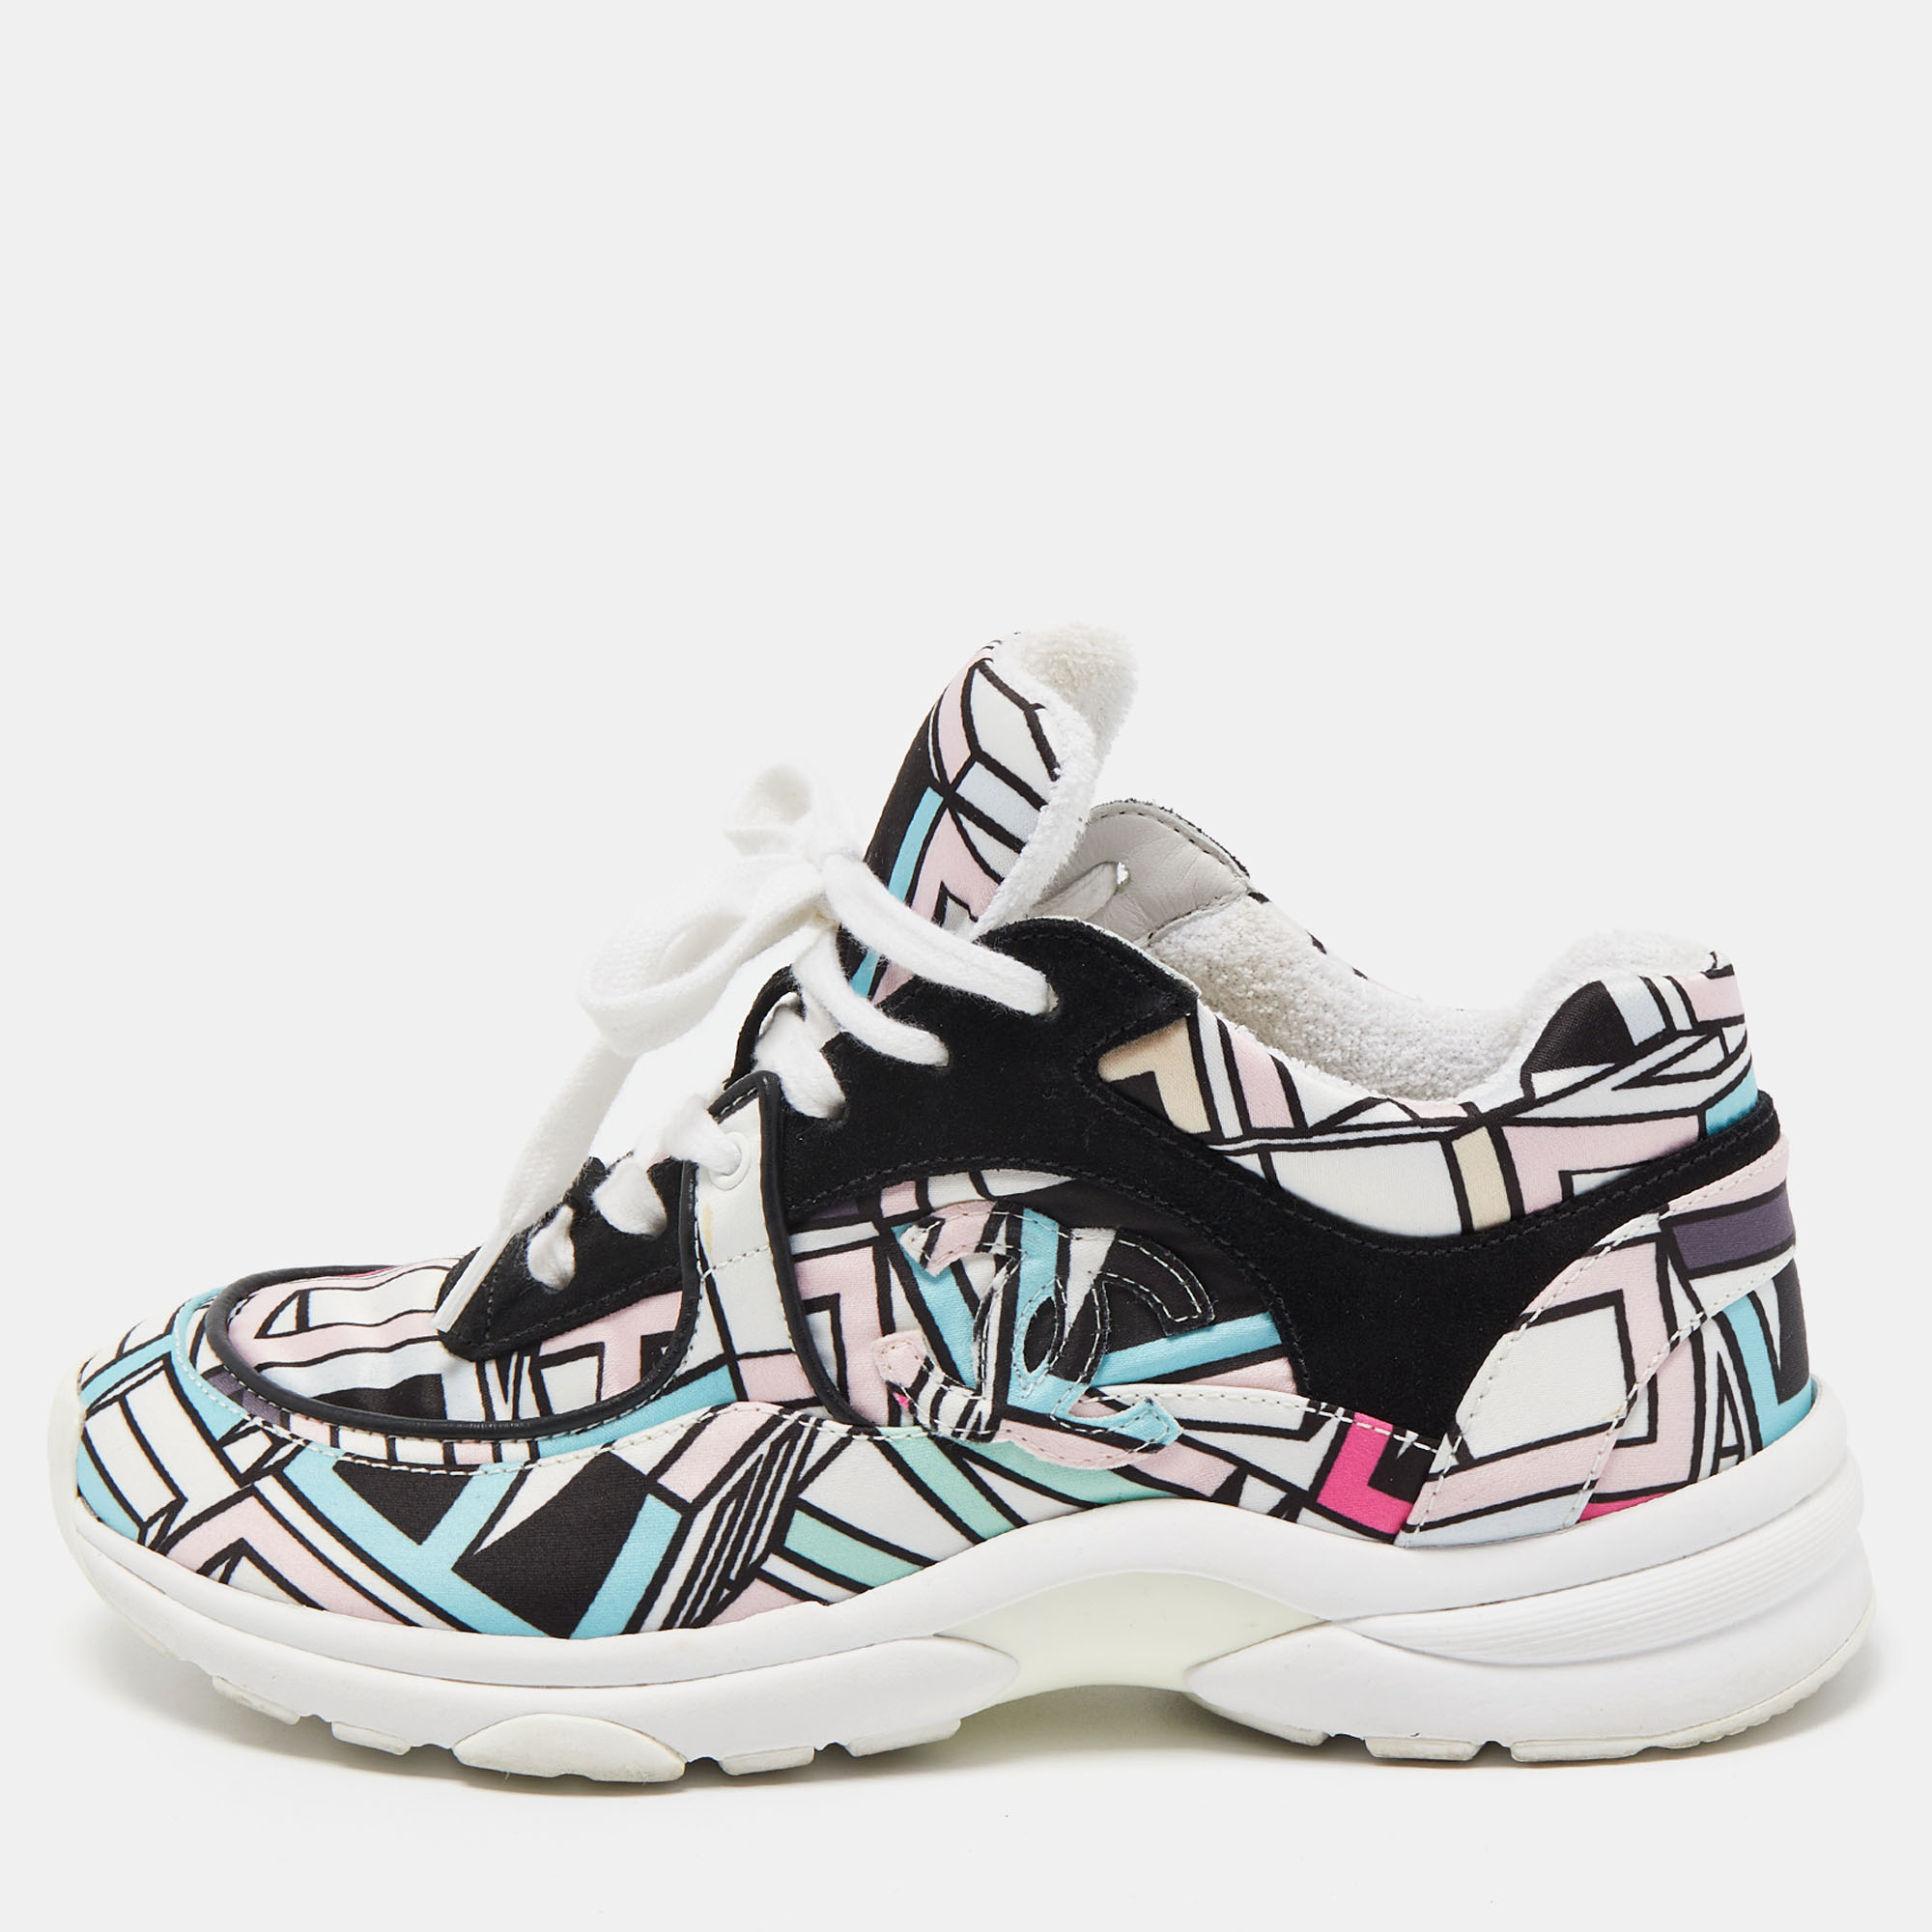 Chanel multicolor abstract print satin and suede cc logo trainer low top sneakers size 35.5